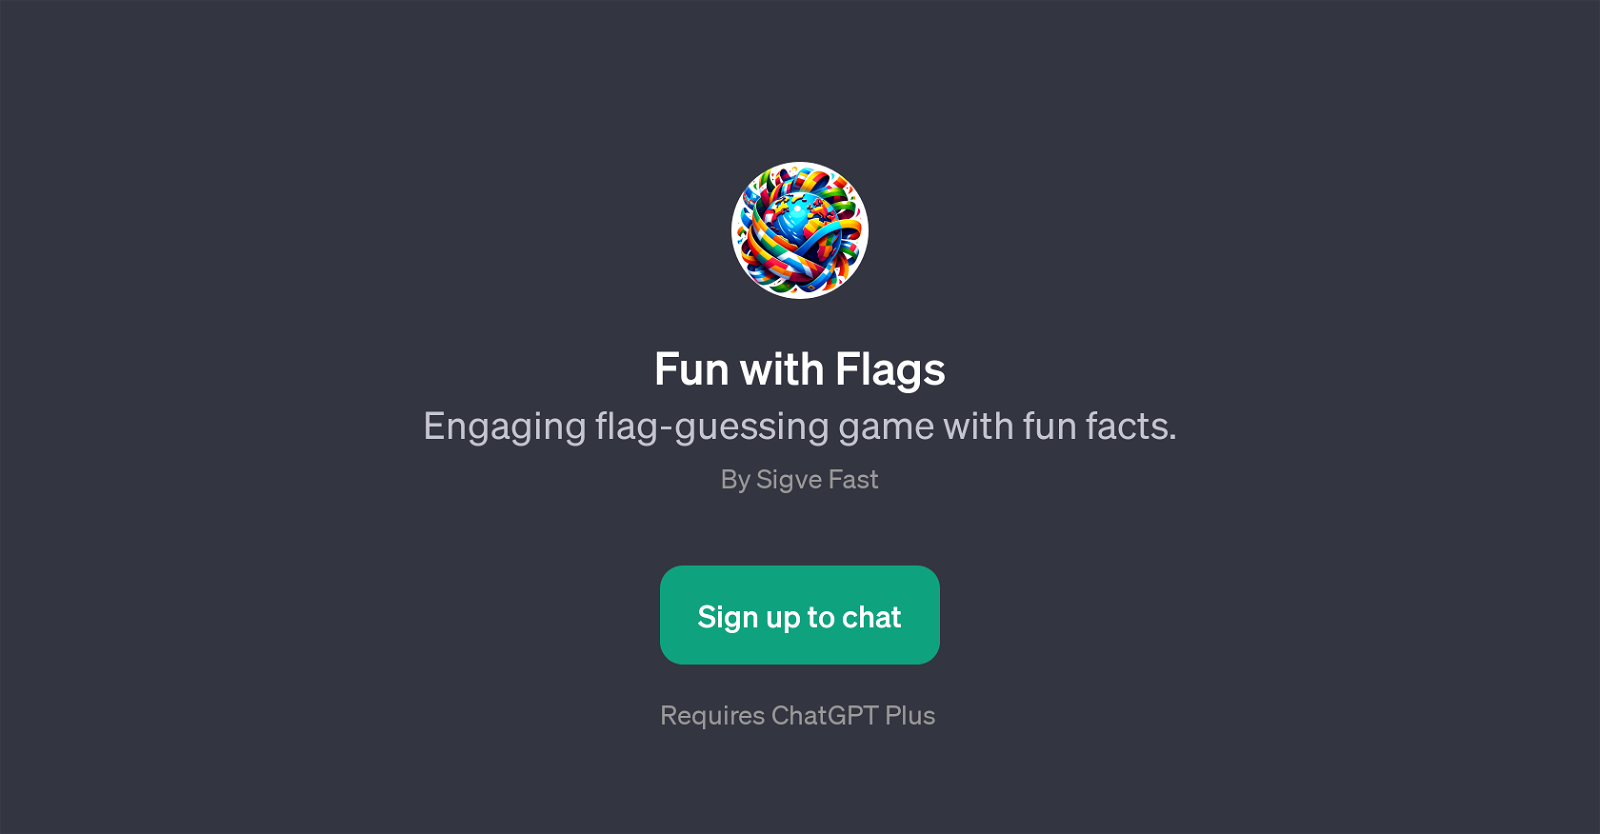 Fun with Flags website